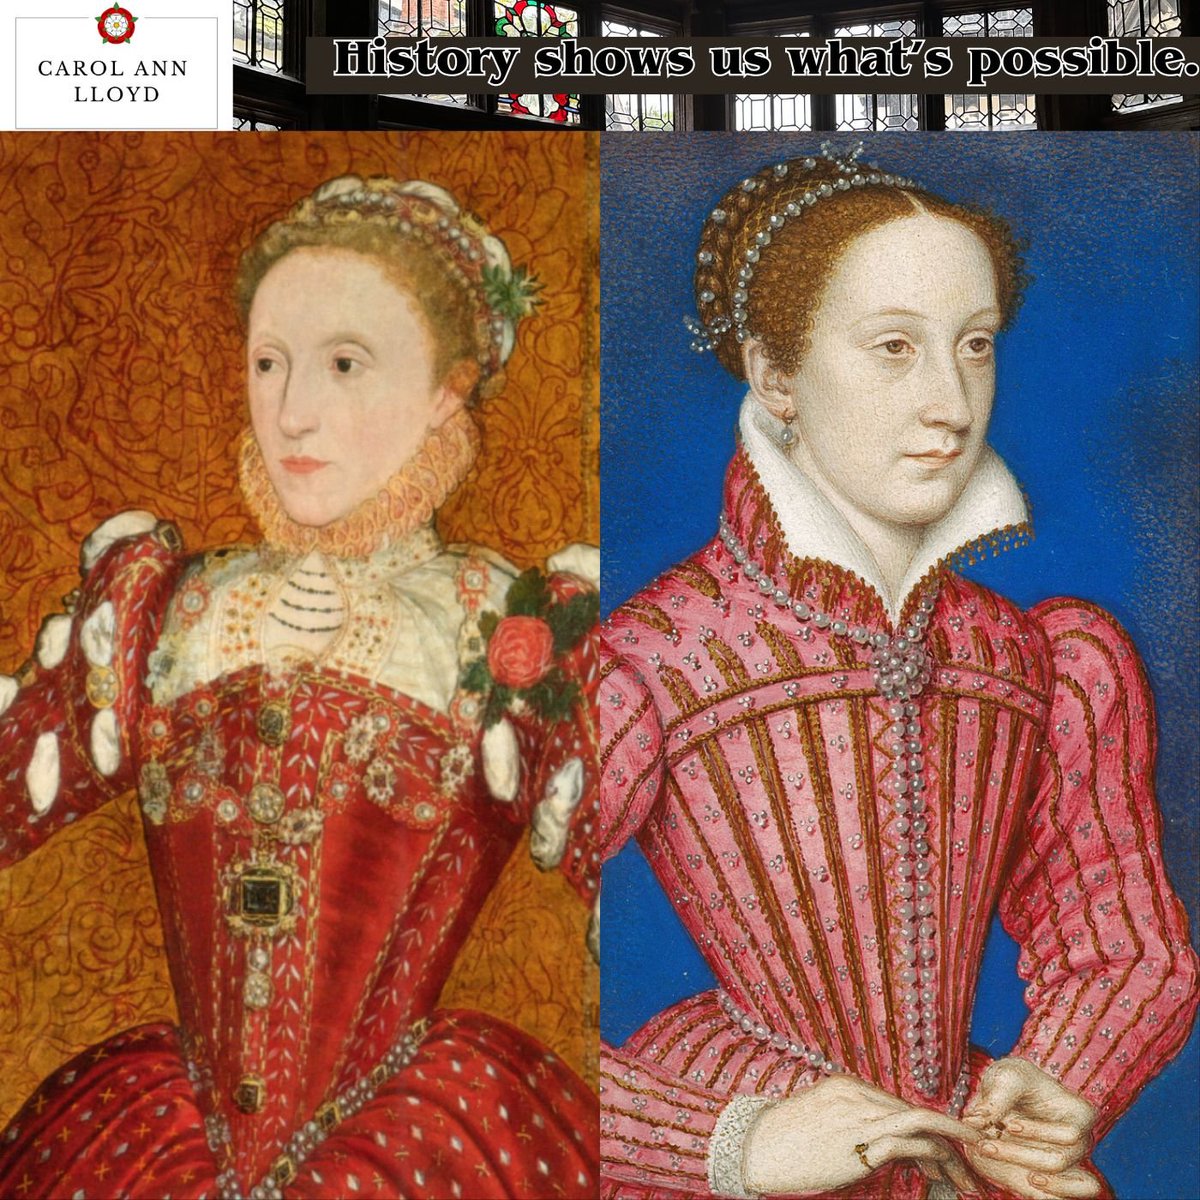 It's not abt Team Mary vs Team Elizabeth. It's abt 2 women who ruled, rewrote the rules, & changed history. Join me with @SmithsonianSA for a discussion abt #ElizabethI & #MaryQueenofScots. #historyshowsuswhatspossible bit.ly/ElizabethMaryQ…